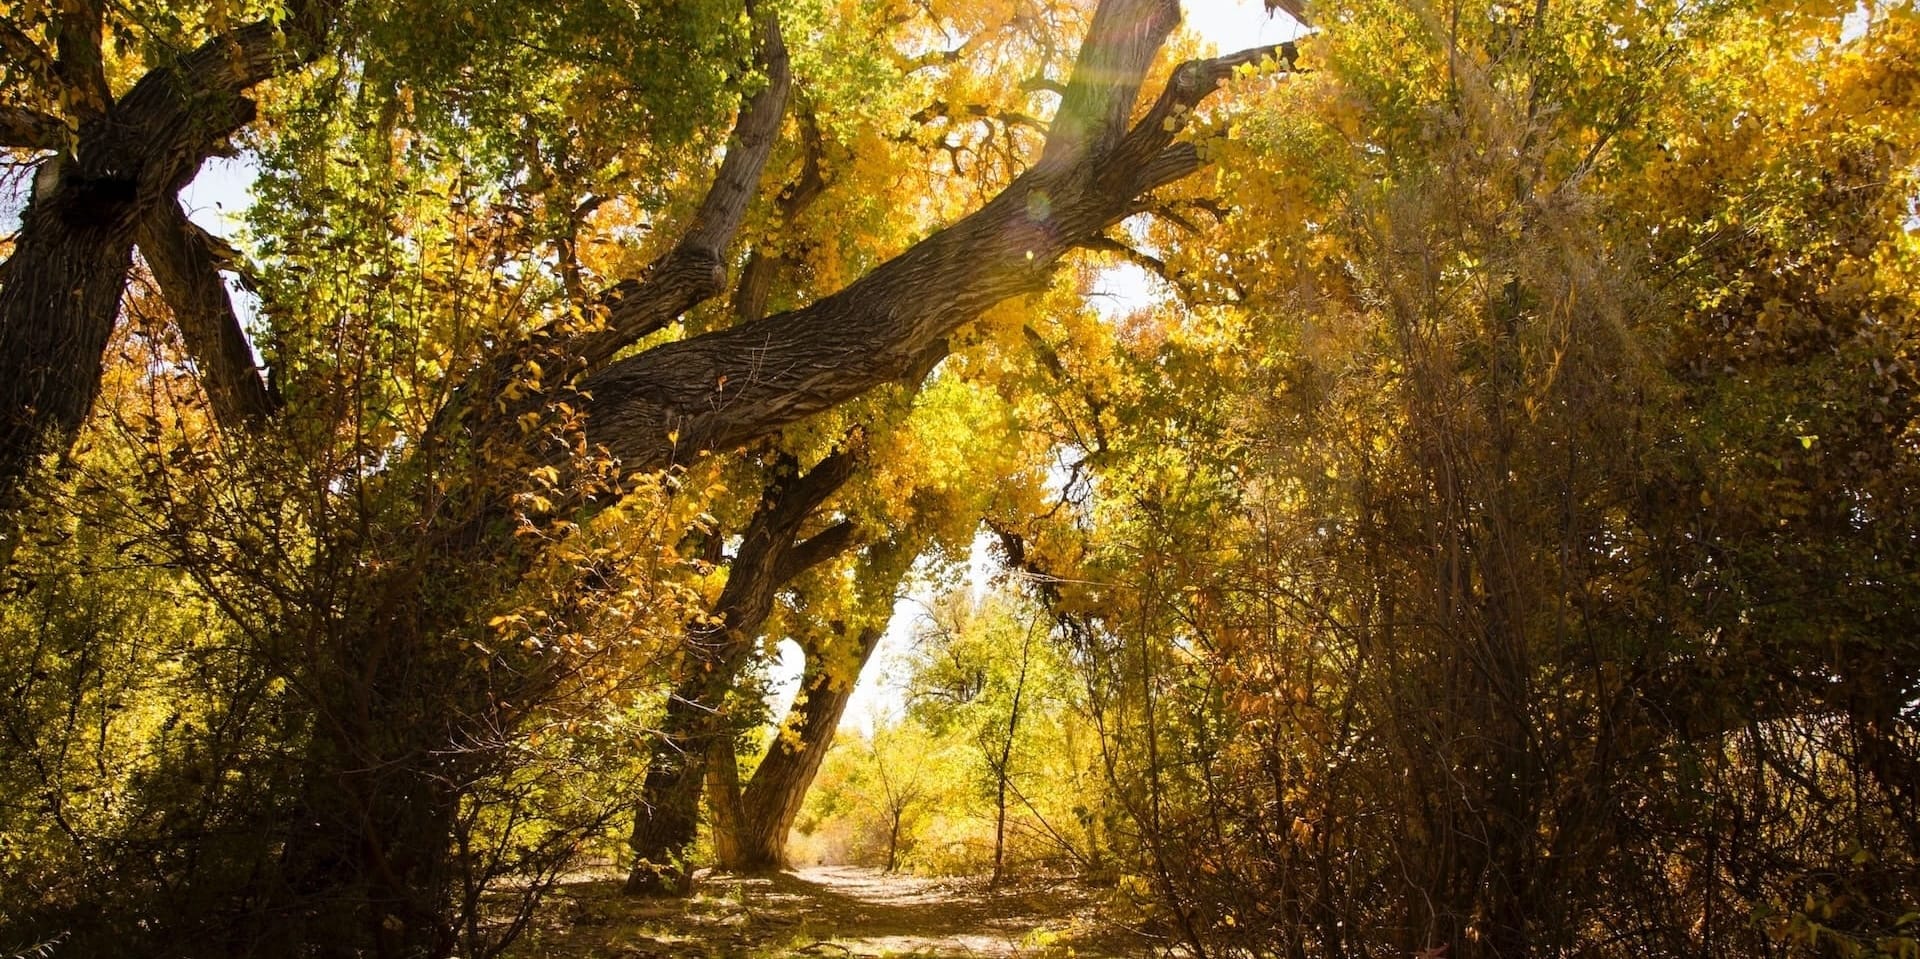 A golden-hued trail along the Bosque of the Rio Grande in Albuquerque, New Mexico. Trees arch over the path, creating a tunnel-like effect. The green leaves are transitioning to yellow, casting a warm, golden glow on the trail. This enchanting path, surrounded by the beauty of nature, evokes a sense of calm and introspection.